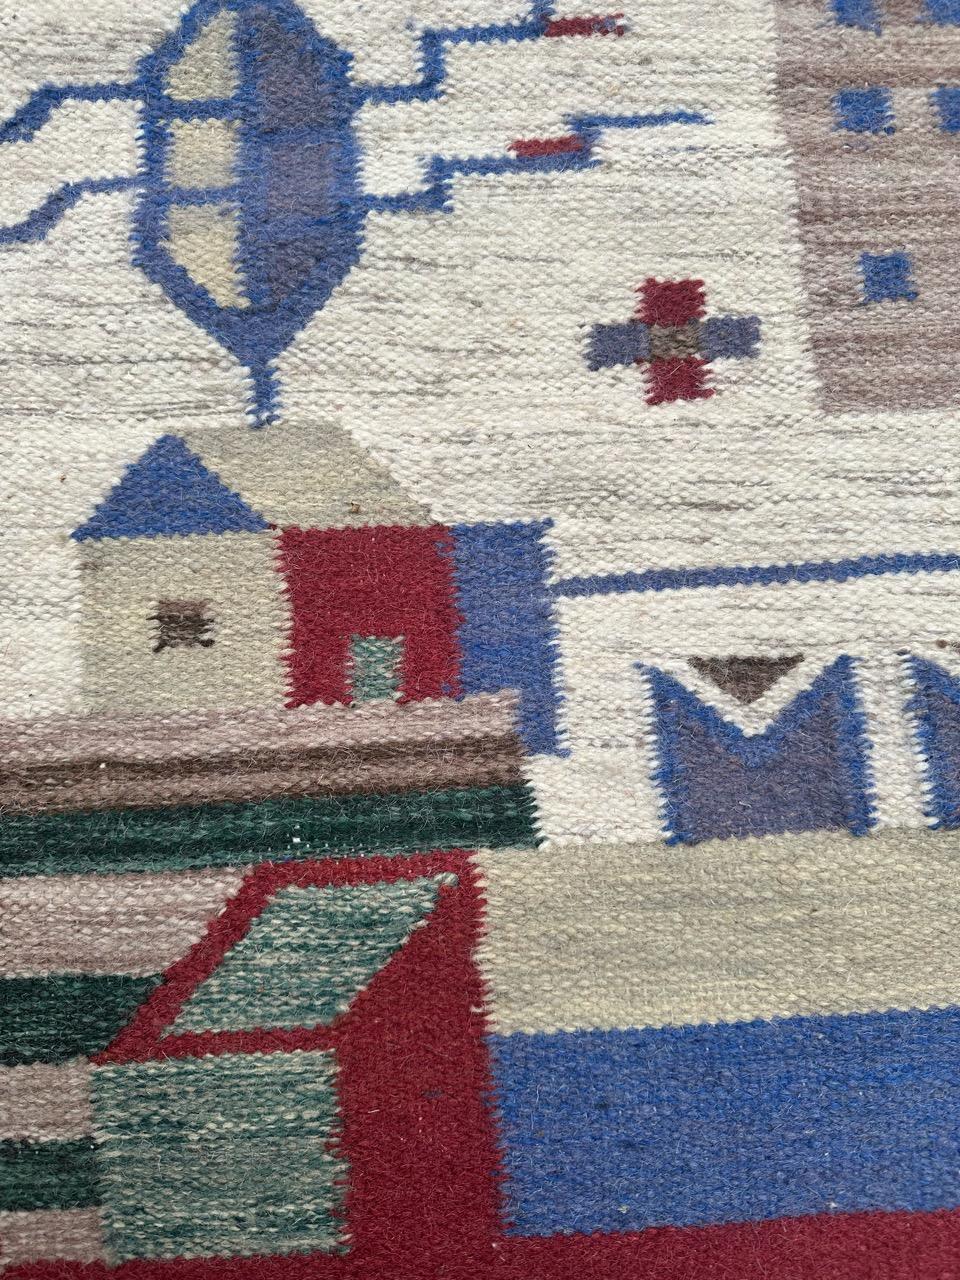 Wonderful mid century polish tapestry with a native geometrical design of town and beautiful light colors, entirely hand woven with wool on cotton foundation

✨✨✨
